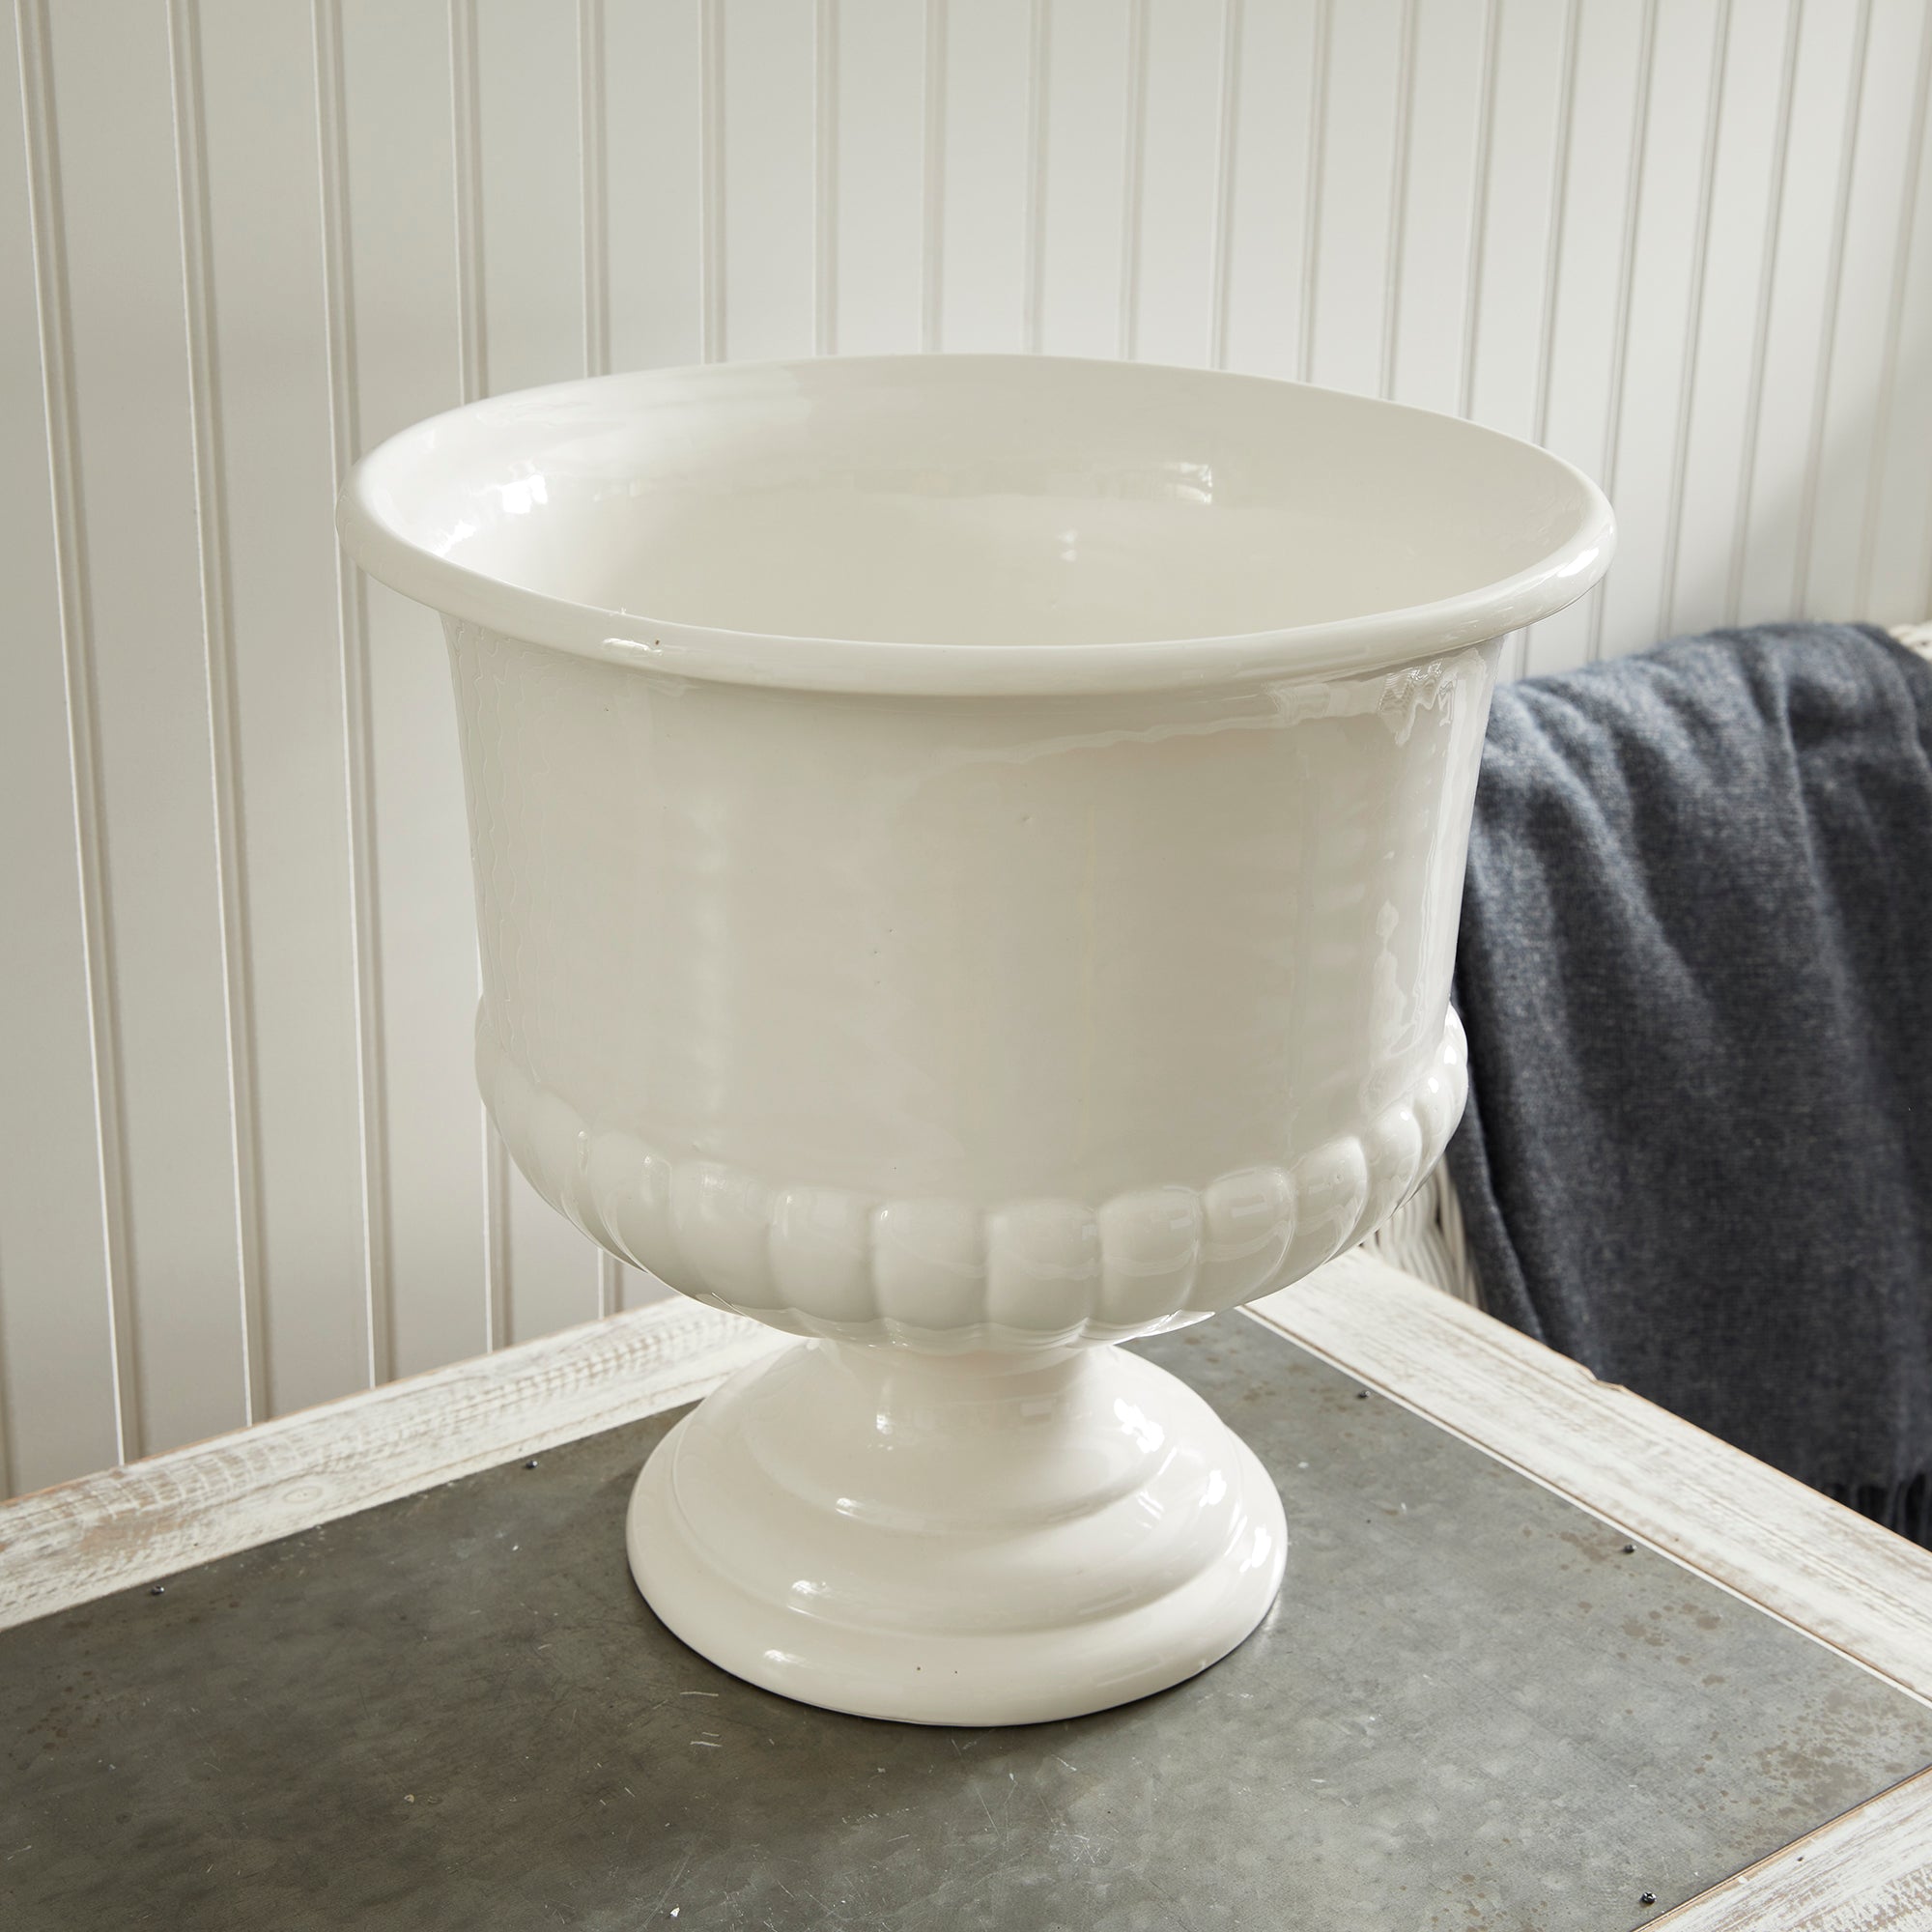 A real statement piece. The Mirabelle Pedestal Bowl is made in classic Italian style. A beautiful addition to any traditional to transitional space. Amethyst Home provides interior design, new construction, custom furniture, and area rugs in the Seattle metro area.